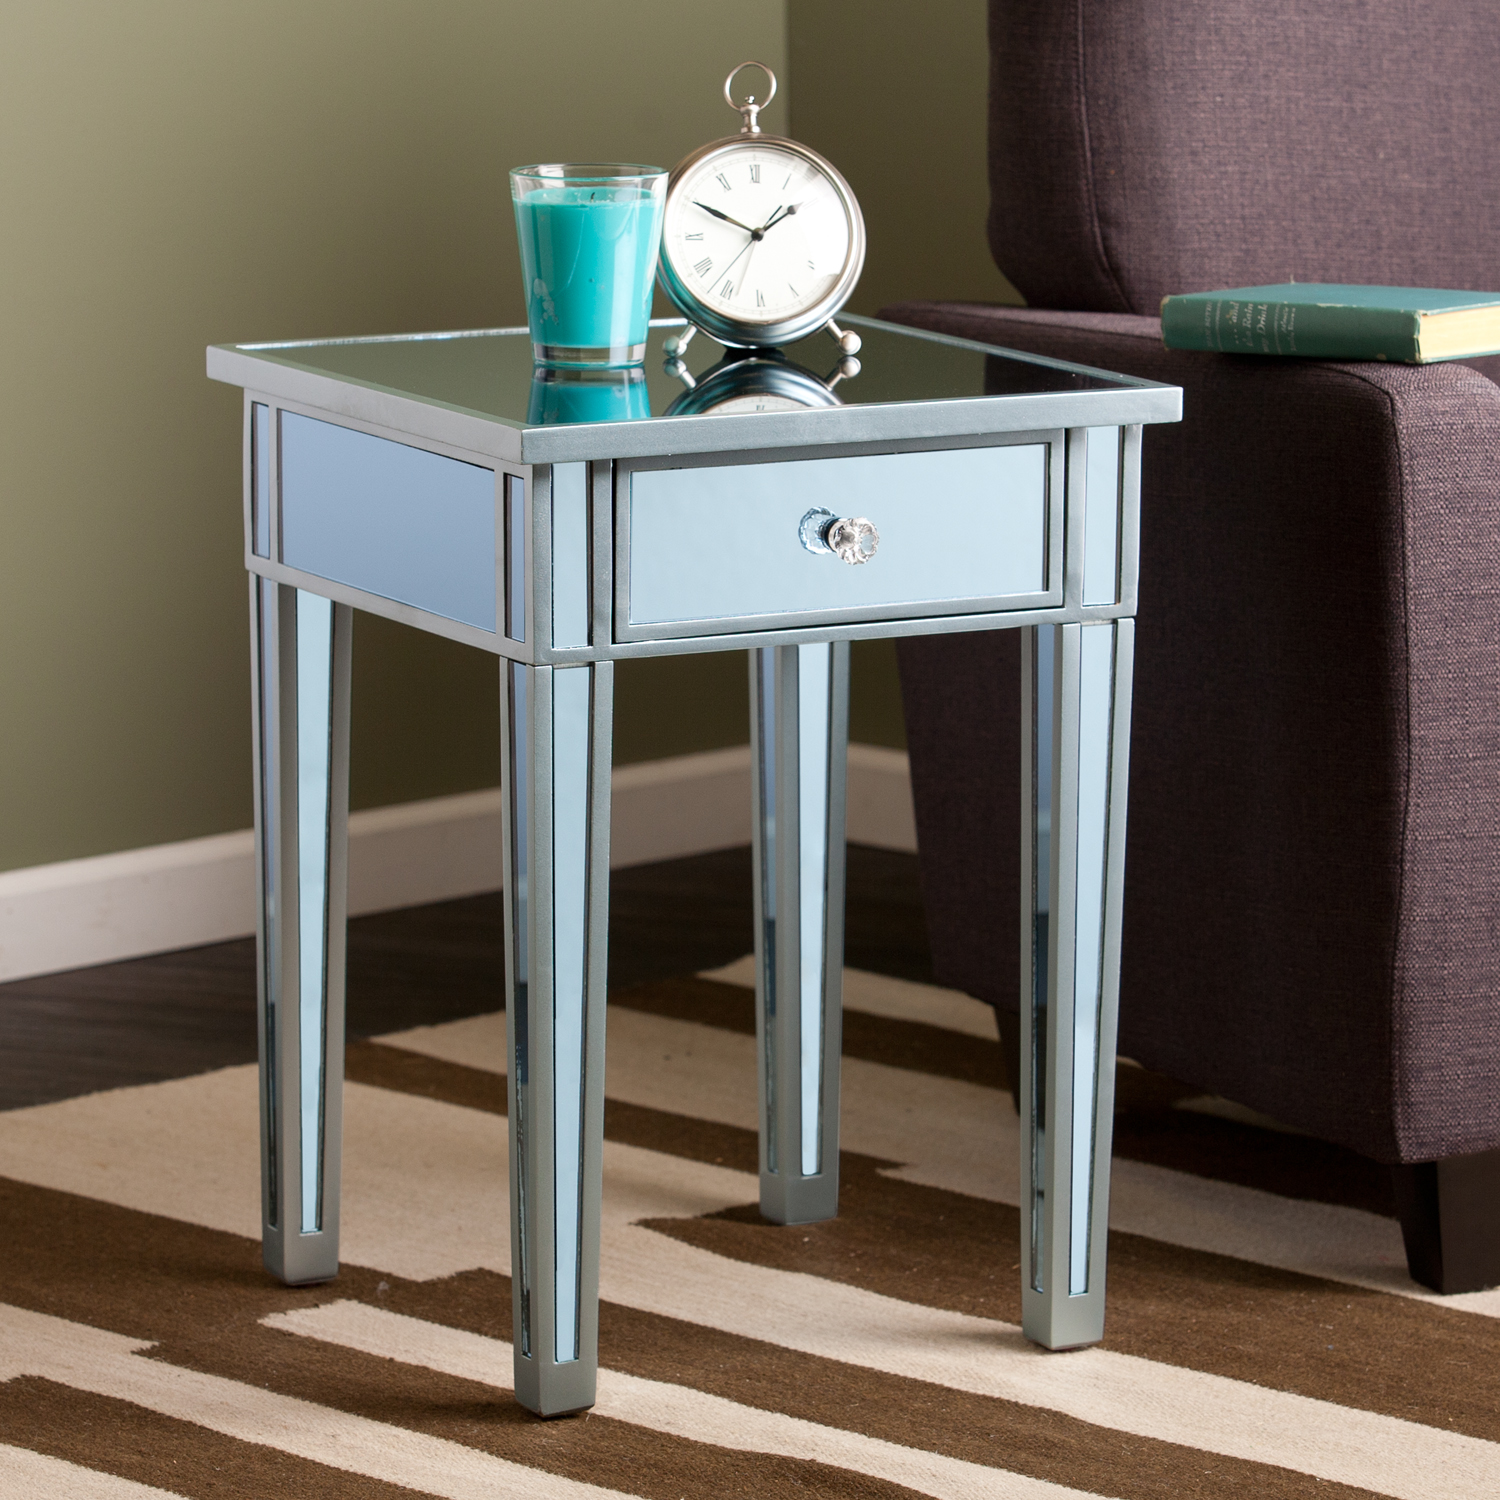 decor blue accent table with mirage colored mirror tables living colorful slim console storage tall lamp for room unfinished wood end oblong coffee triangle furniture inch round